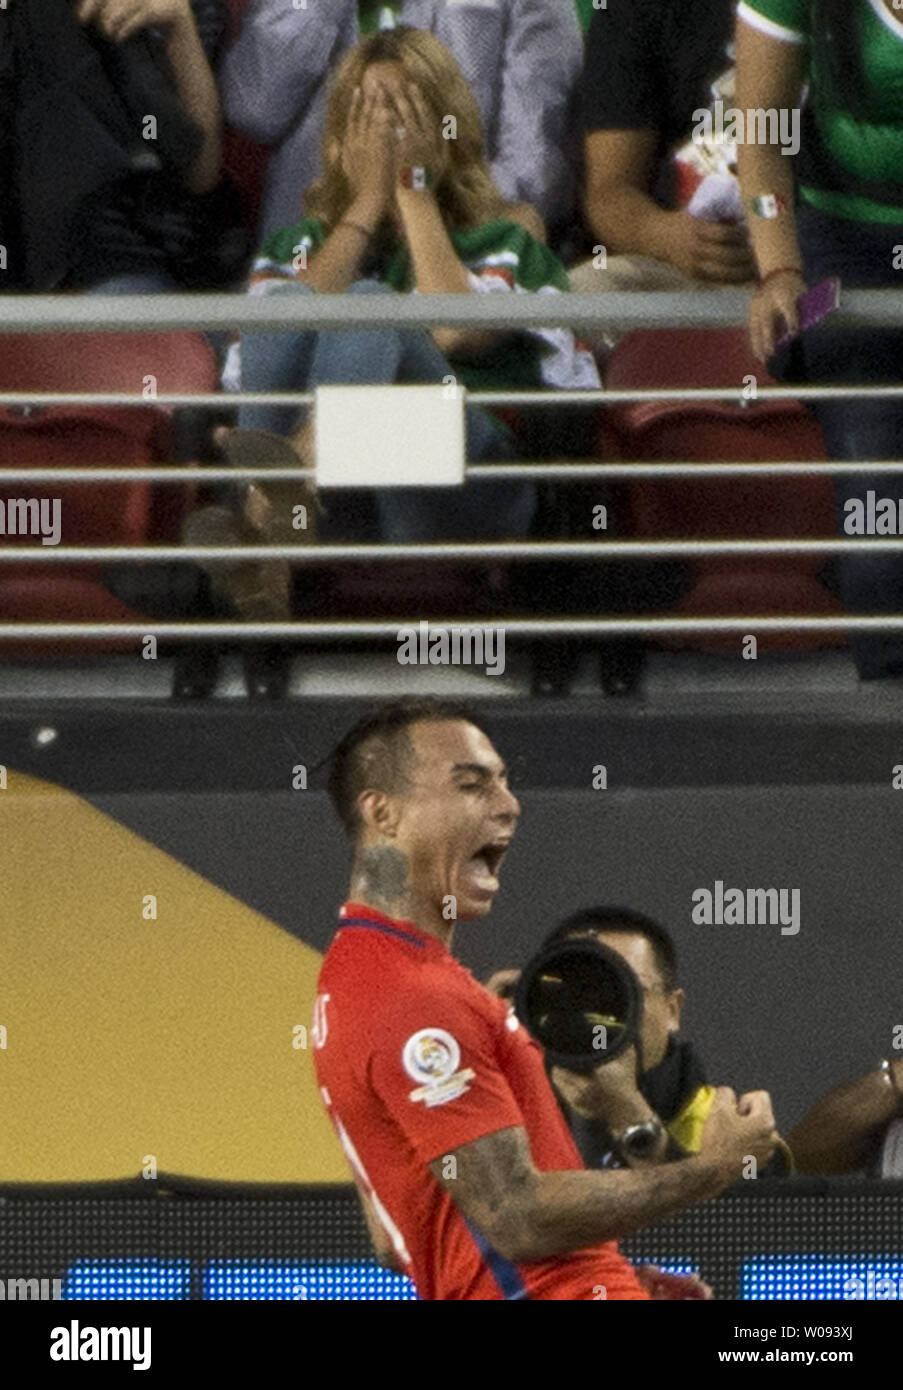 Chile's Eduardo Vargas celebrates a goal against Mexico in the second half as a Mexico fan covers her face at COPA America Centenario quarter-finals at Levi's Stadium in Santa Clara, California on June 18,  2016. Vargas had four goals as Chile annihilated Mexico 7-0.   Photo by Terry Schmitt/UPI Stock Photo